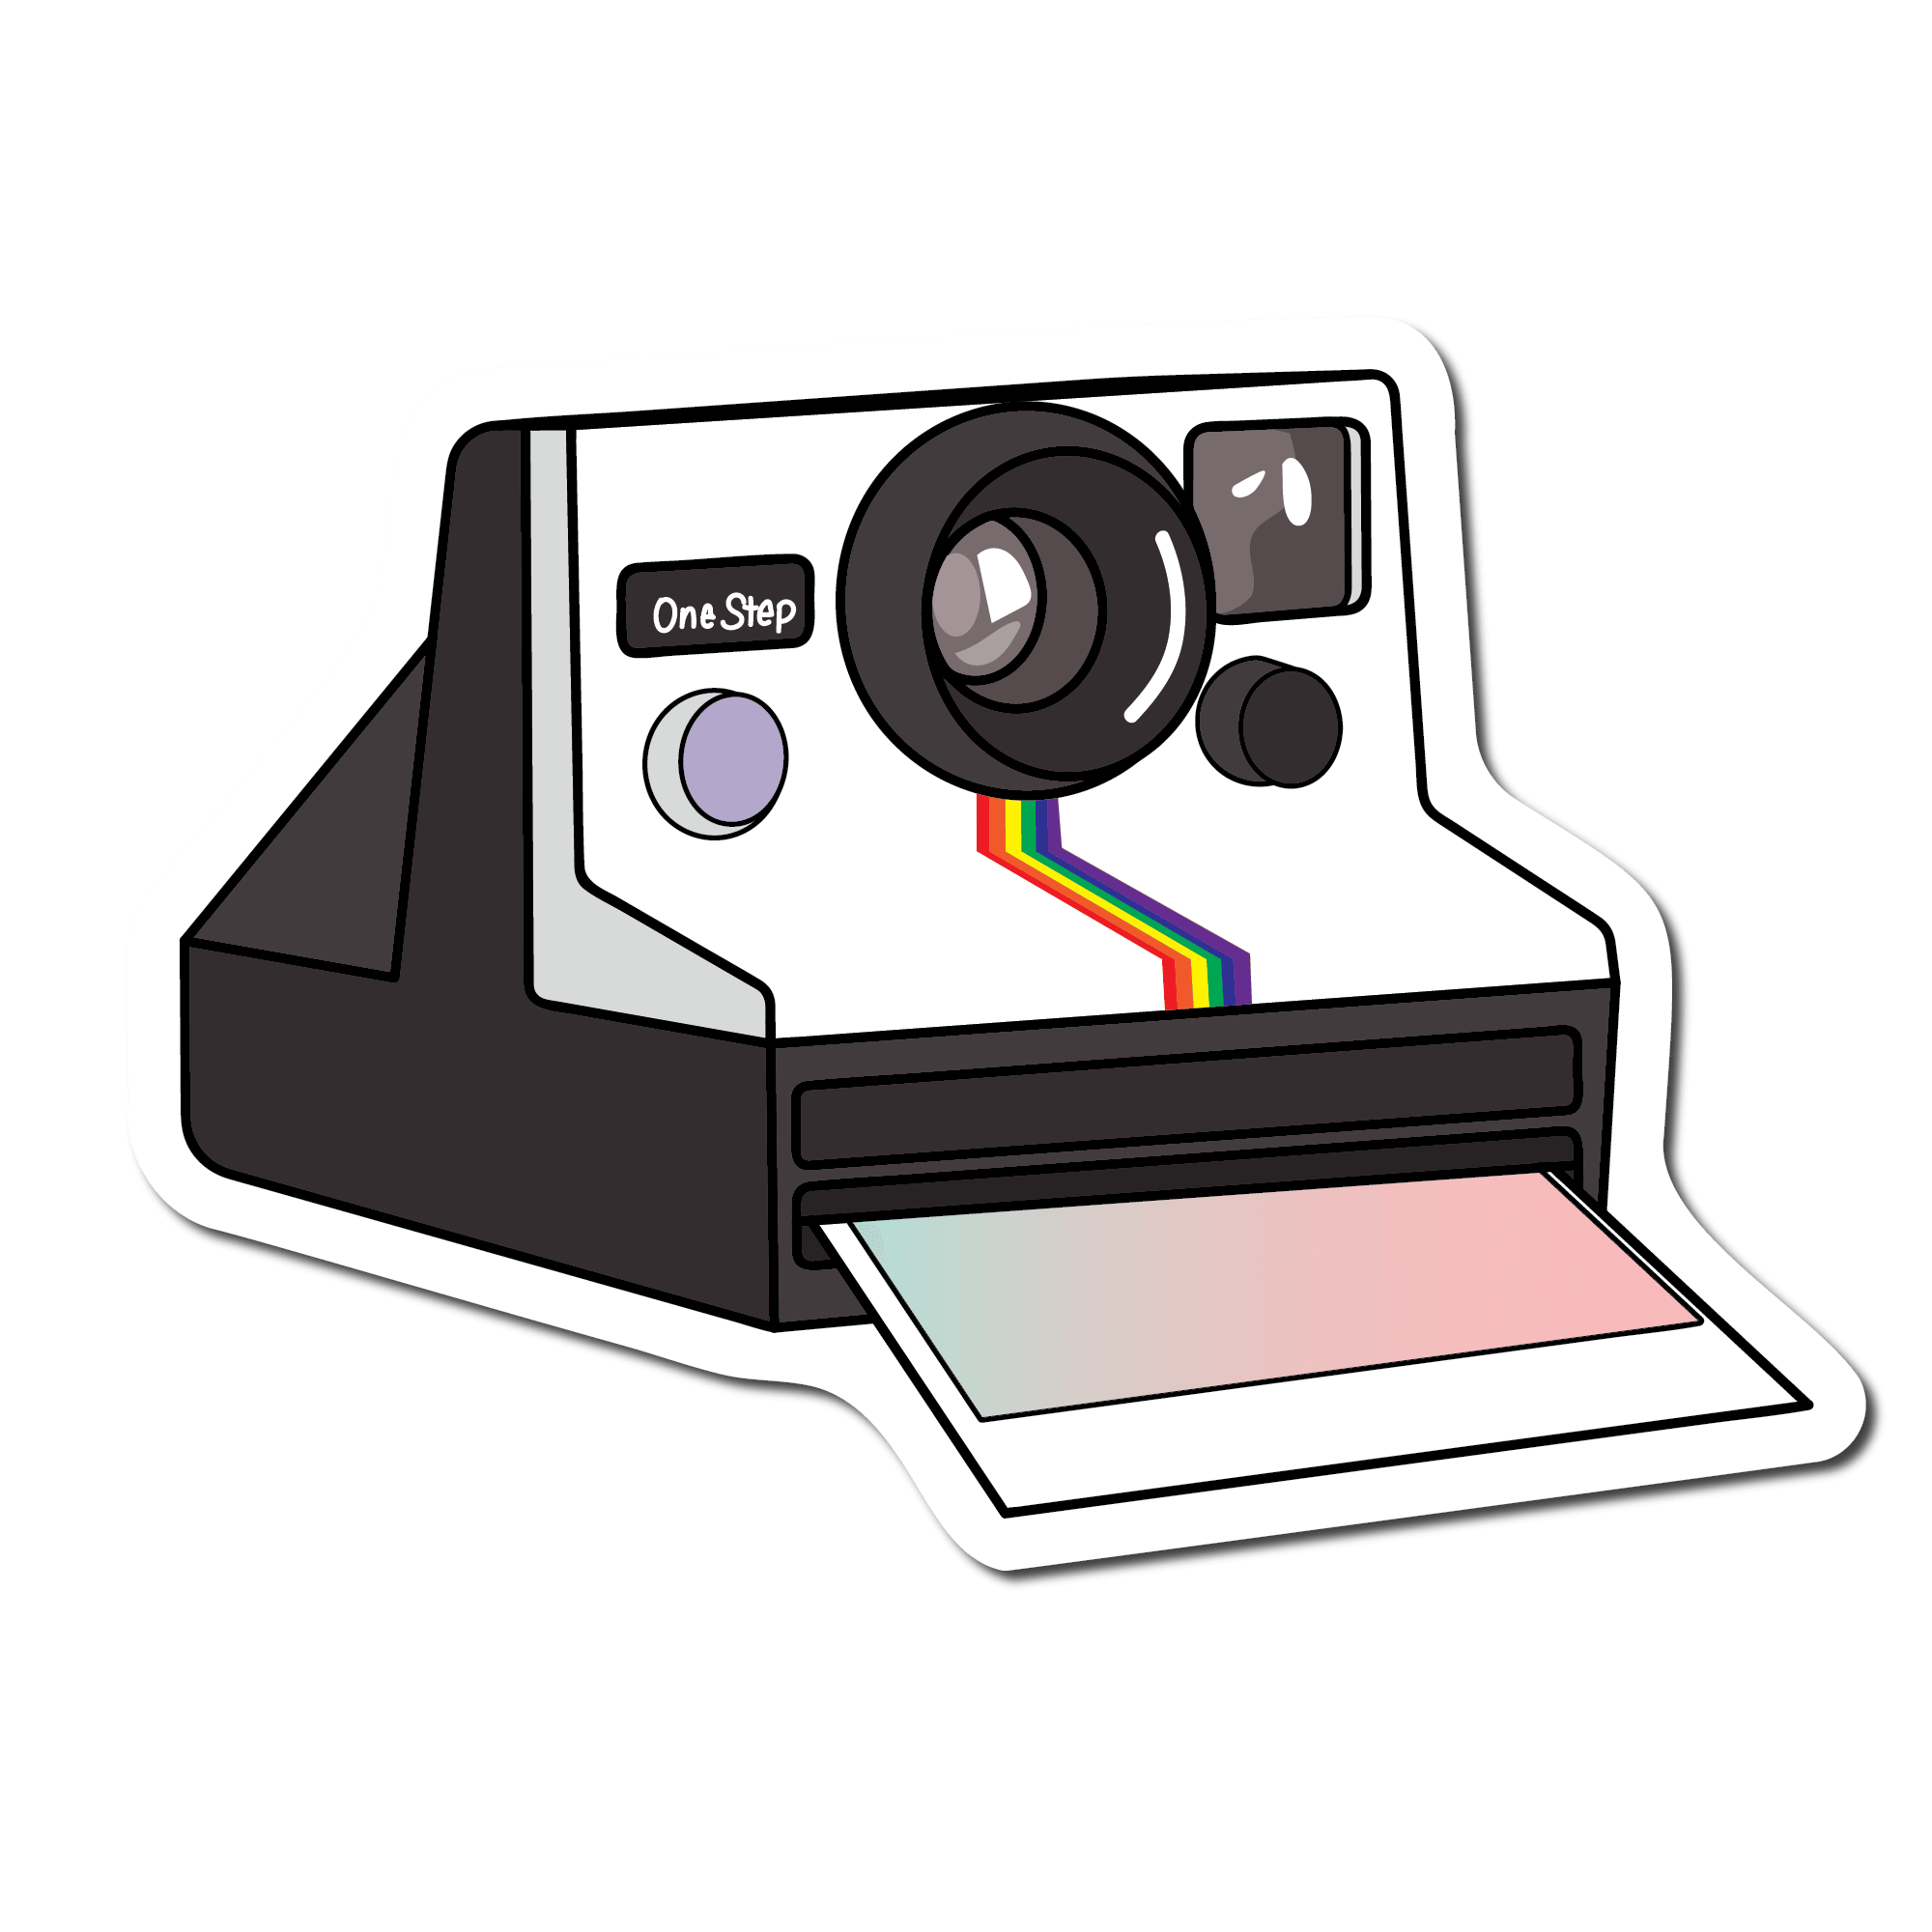 Small Sticker of a retro instant camera that is black and white with a pink and blue photo printing